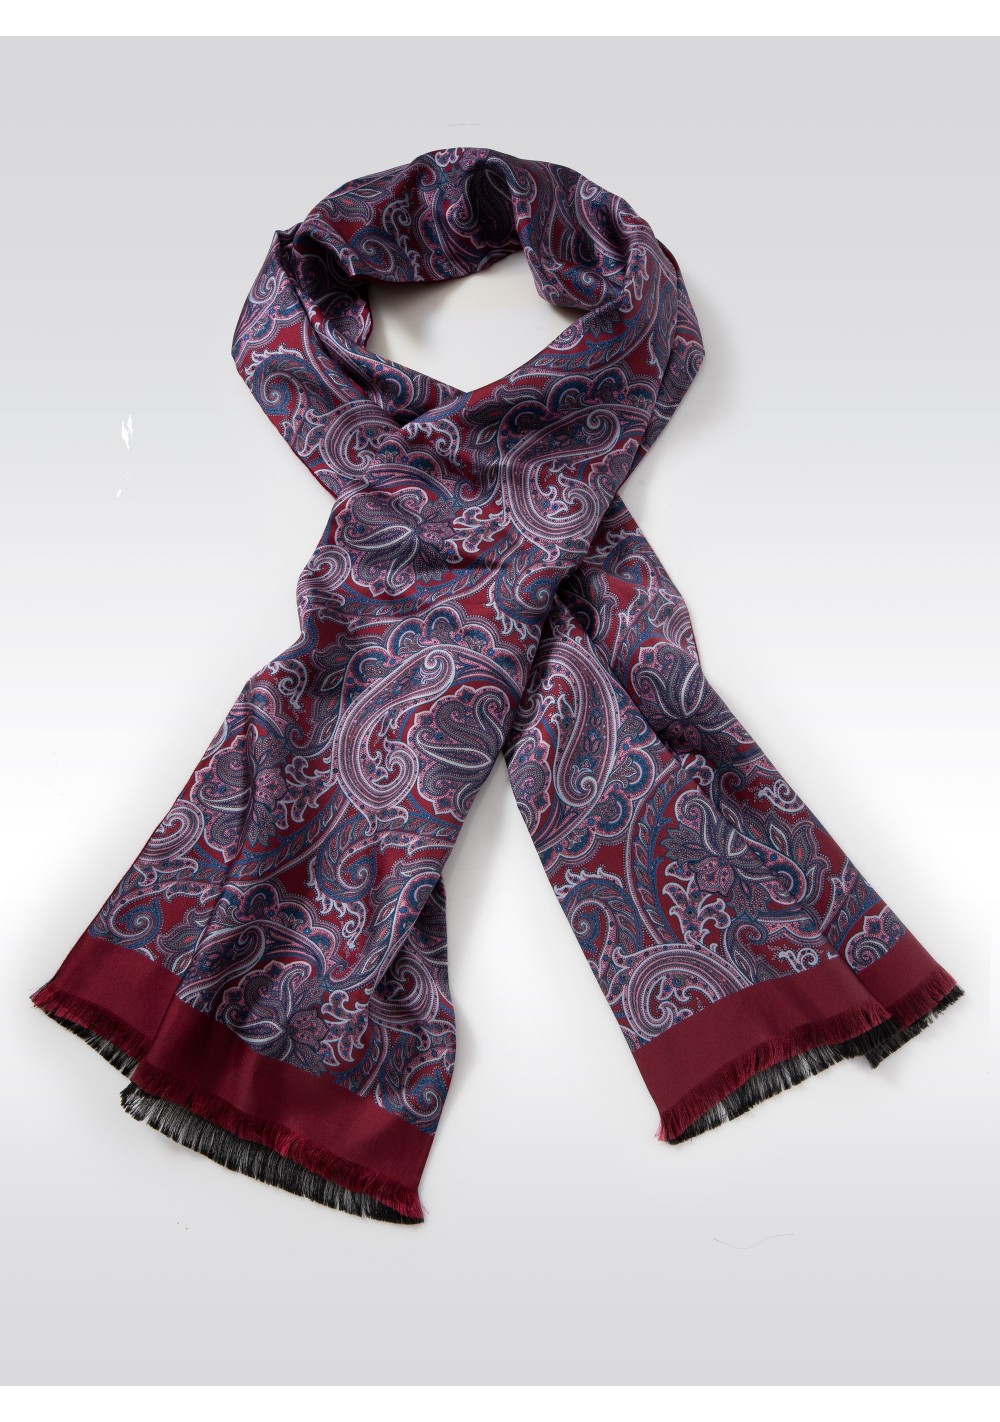 Persian Paisley Print Scarf in Burgundy, Lilac, and Lavender